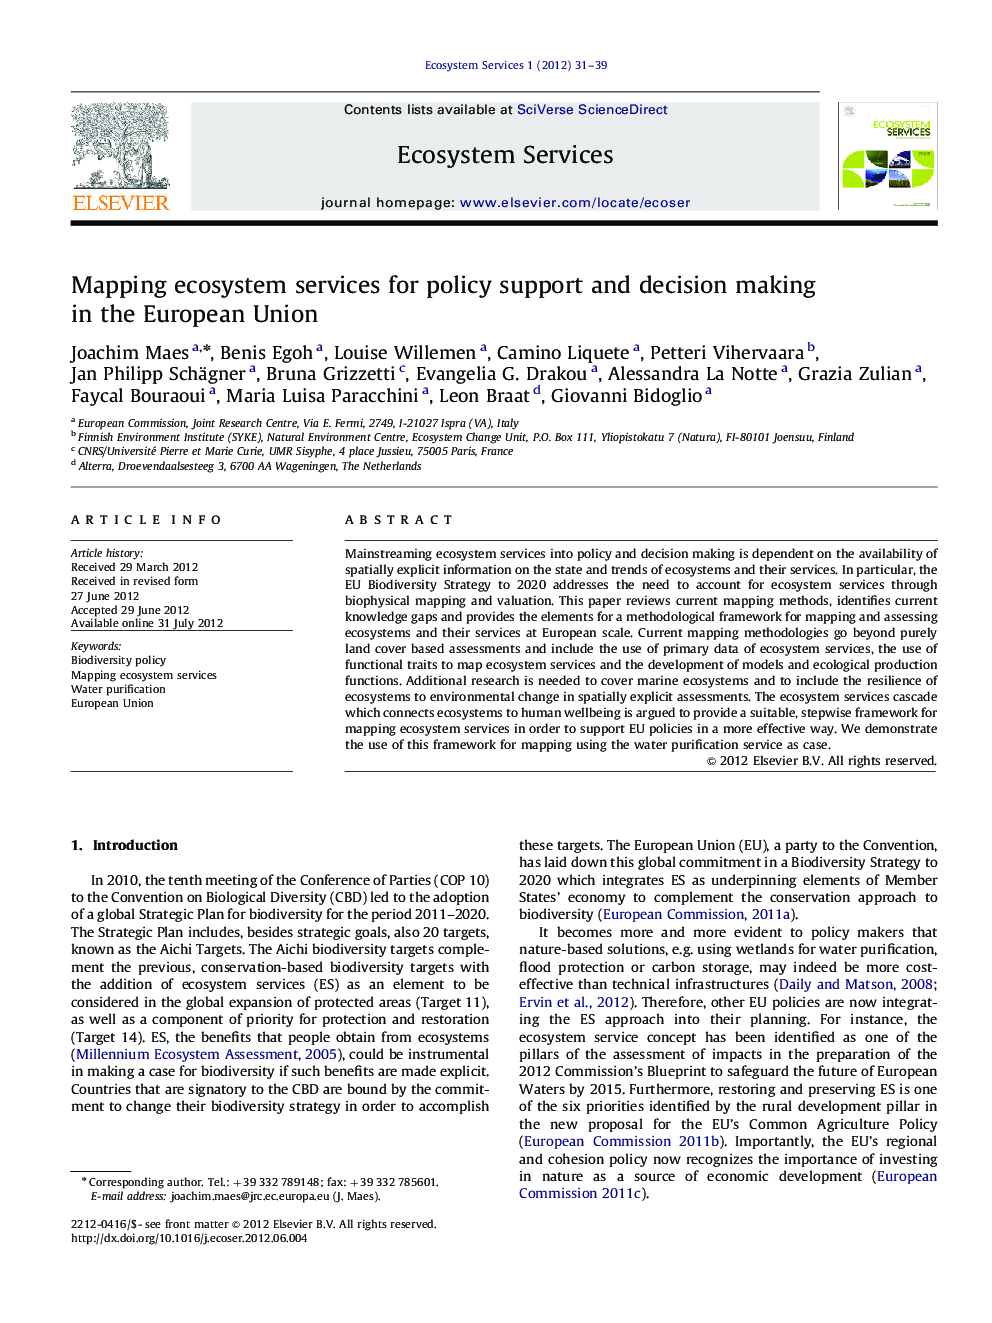 Mapping ecosystem services for policy support and decision making in the European Union